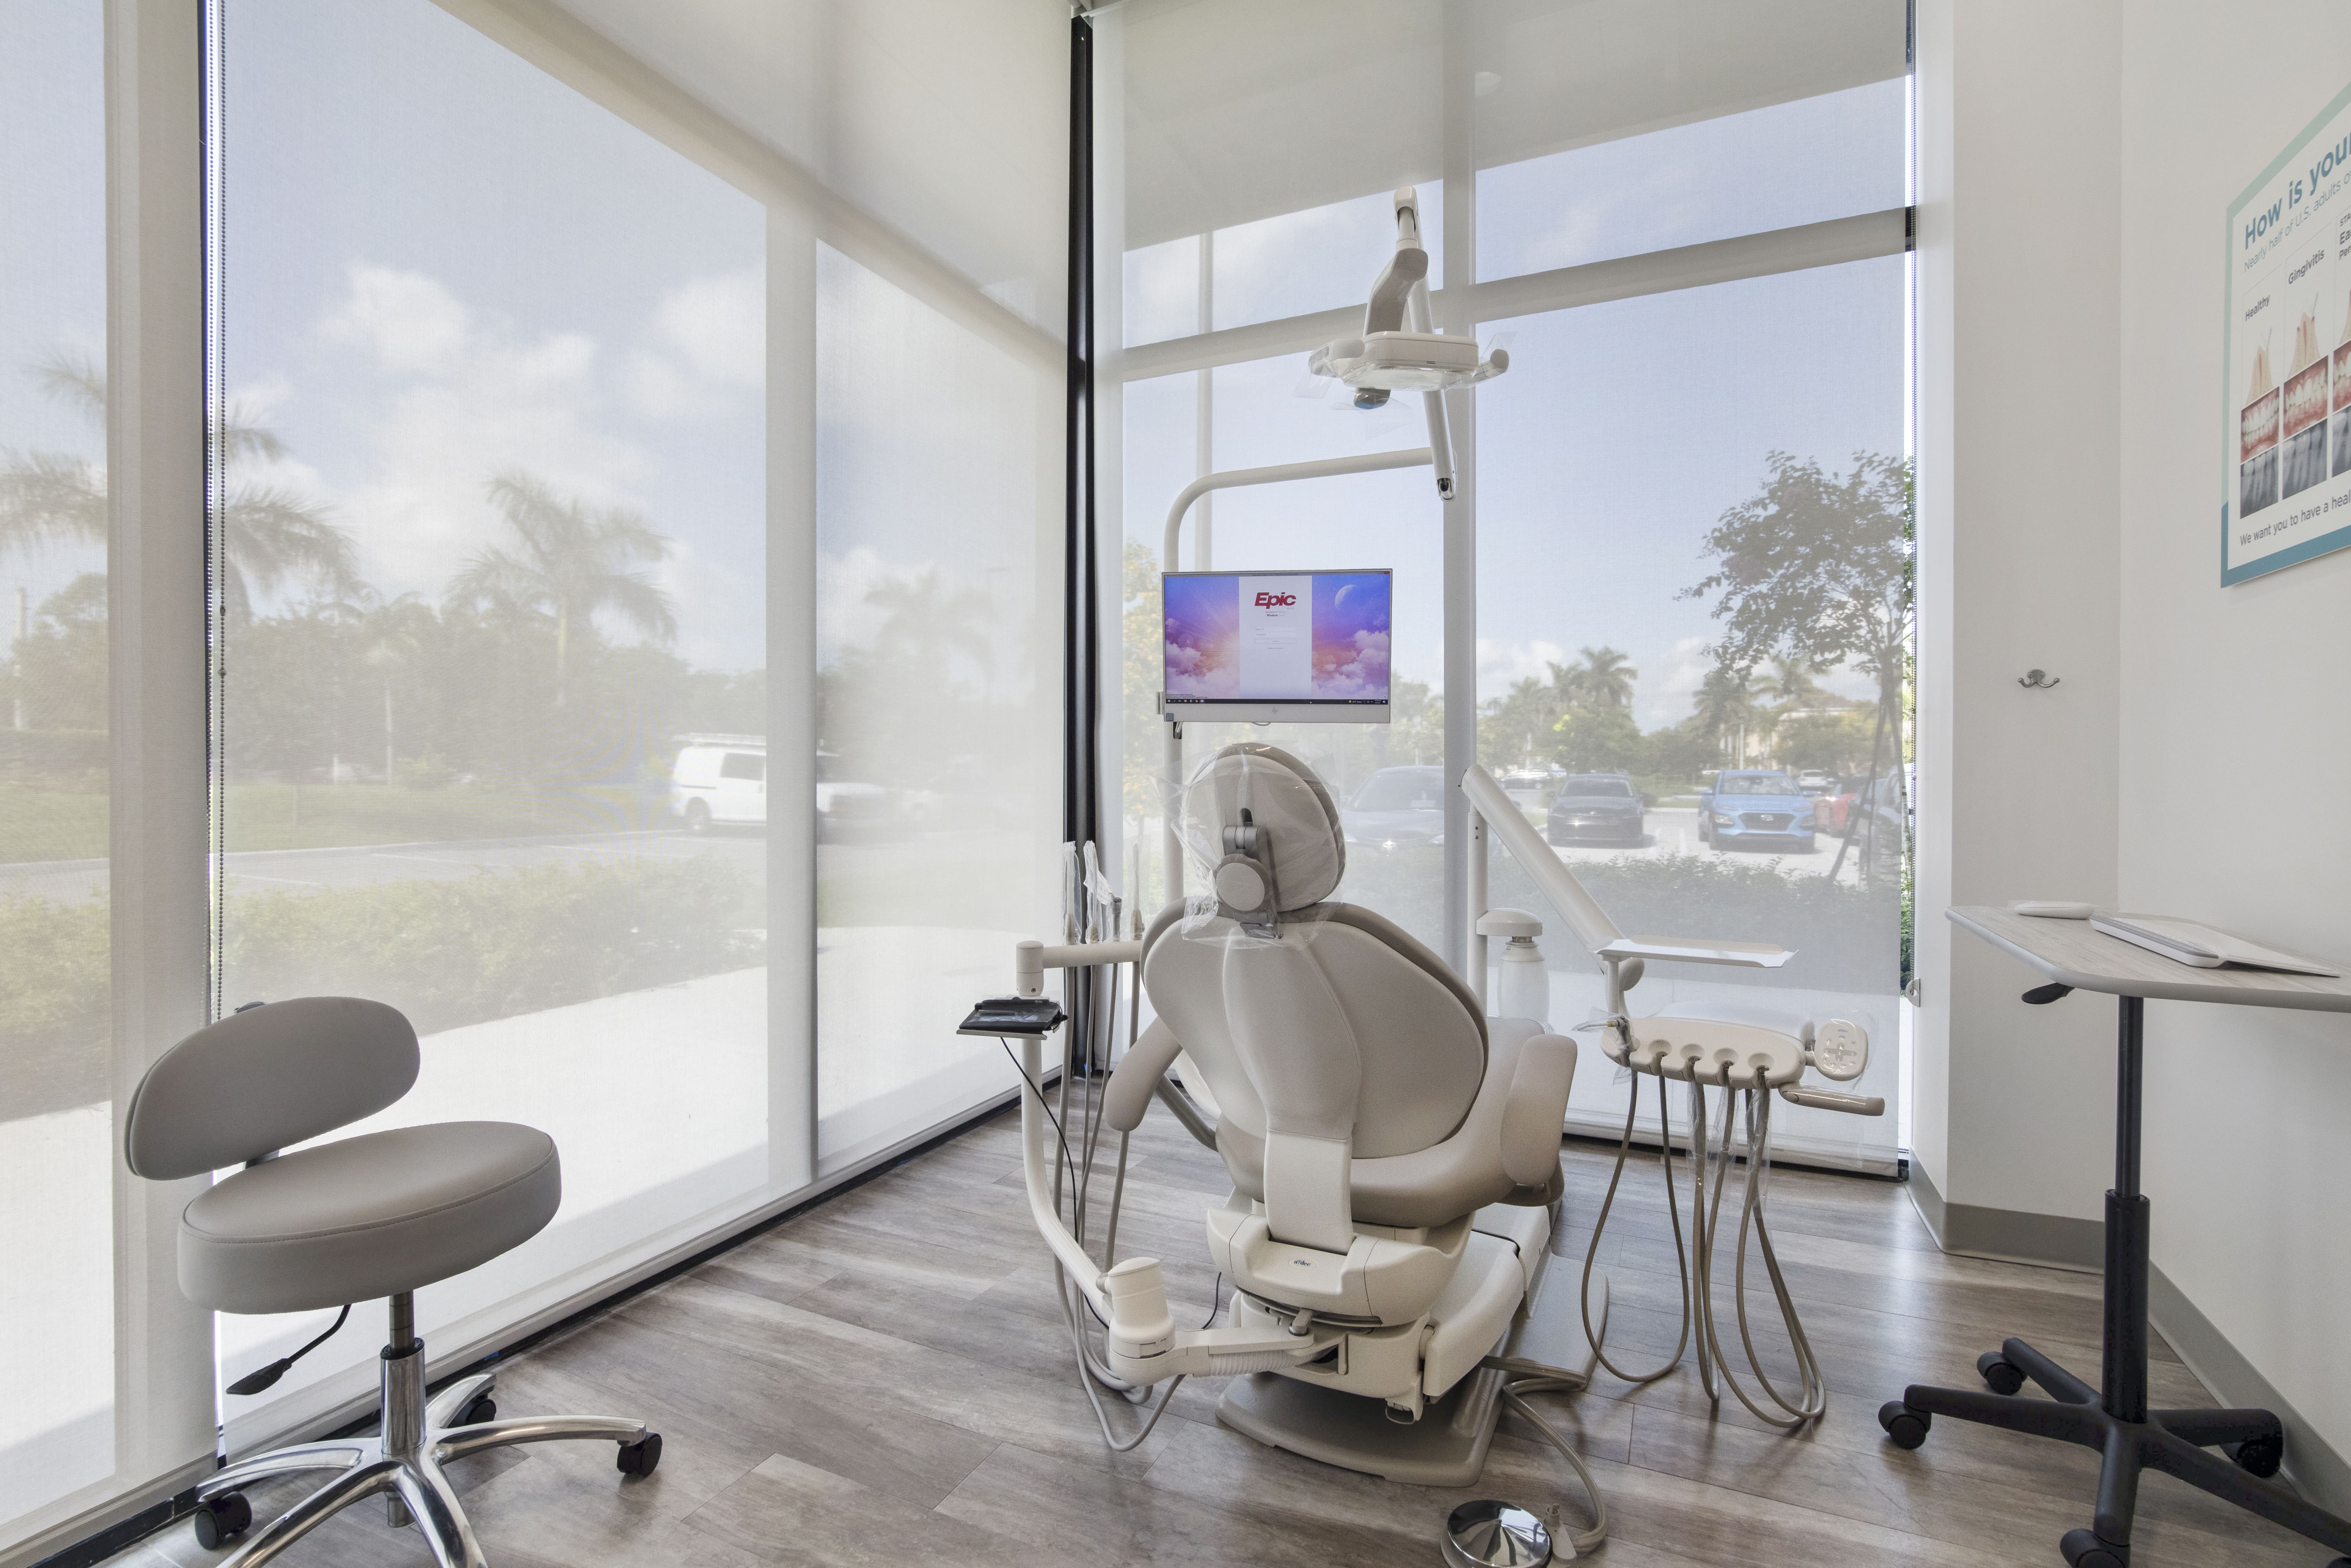 Dental care for your entire family in Miramar, FL